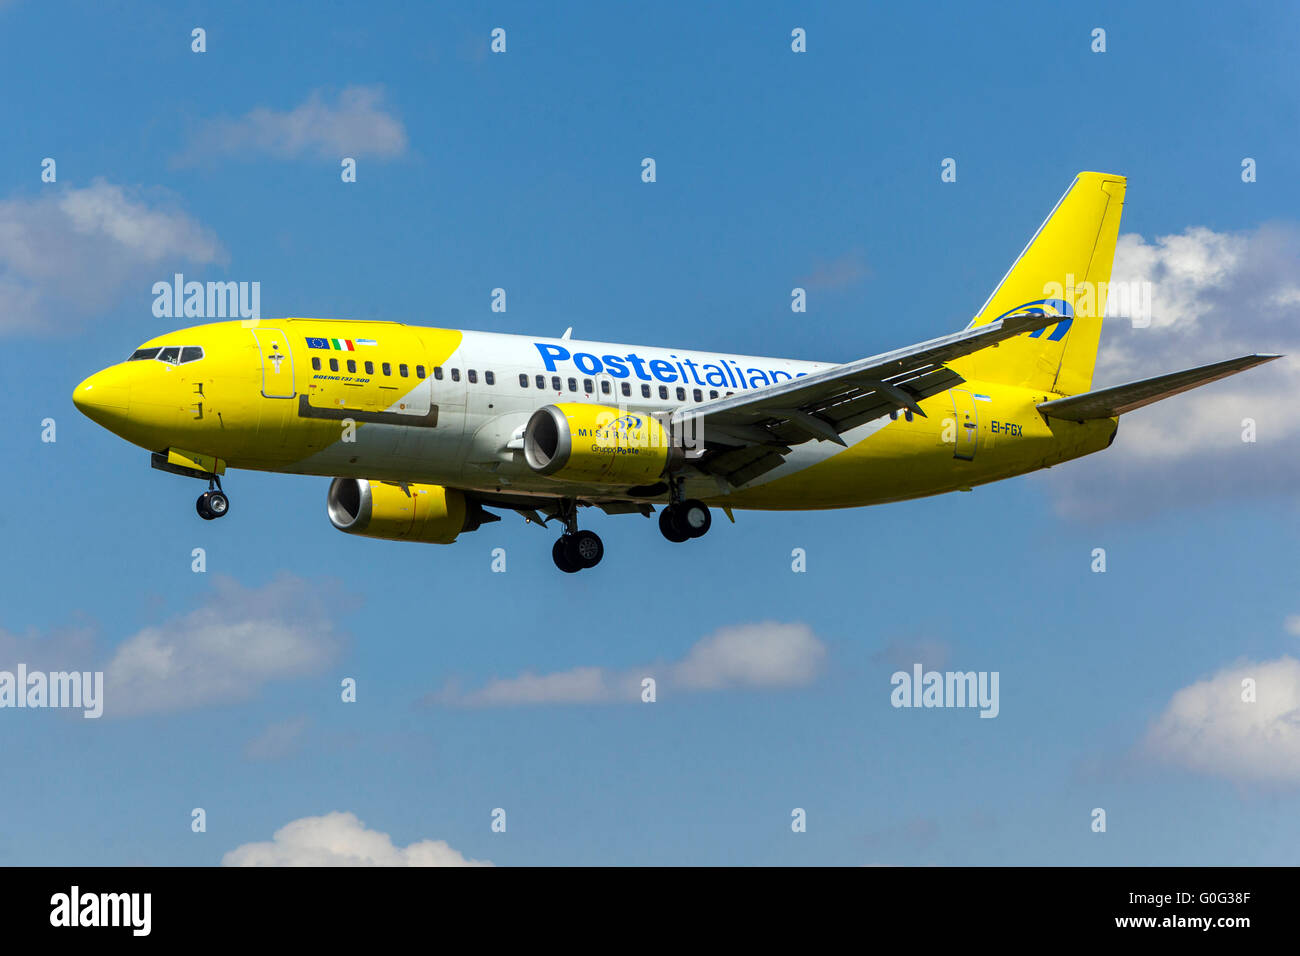 Poste italiane plane hi-res stock photography and images - Alamy